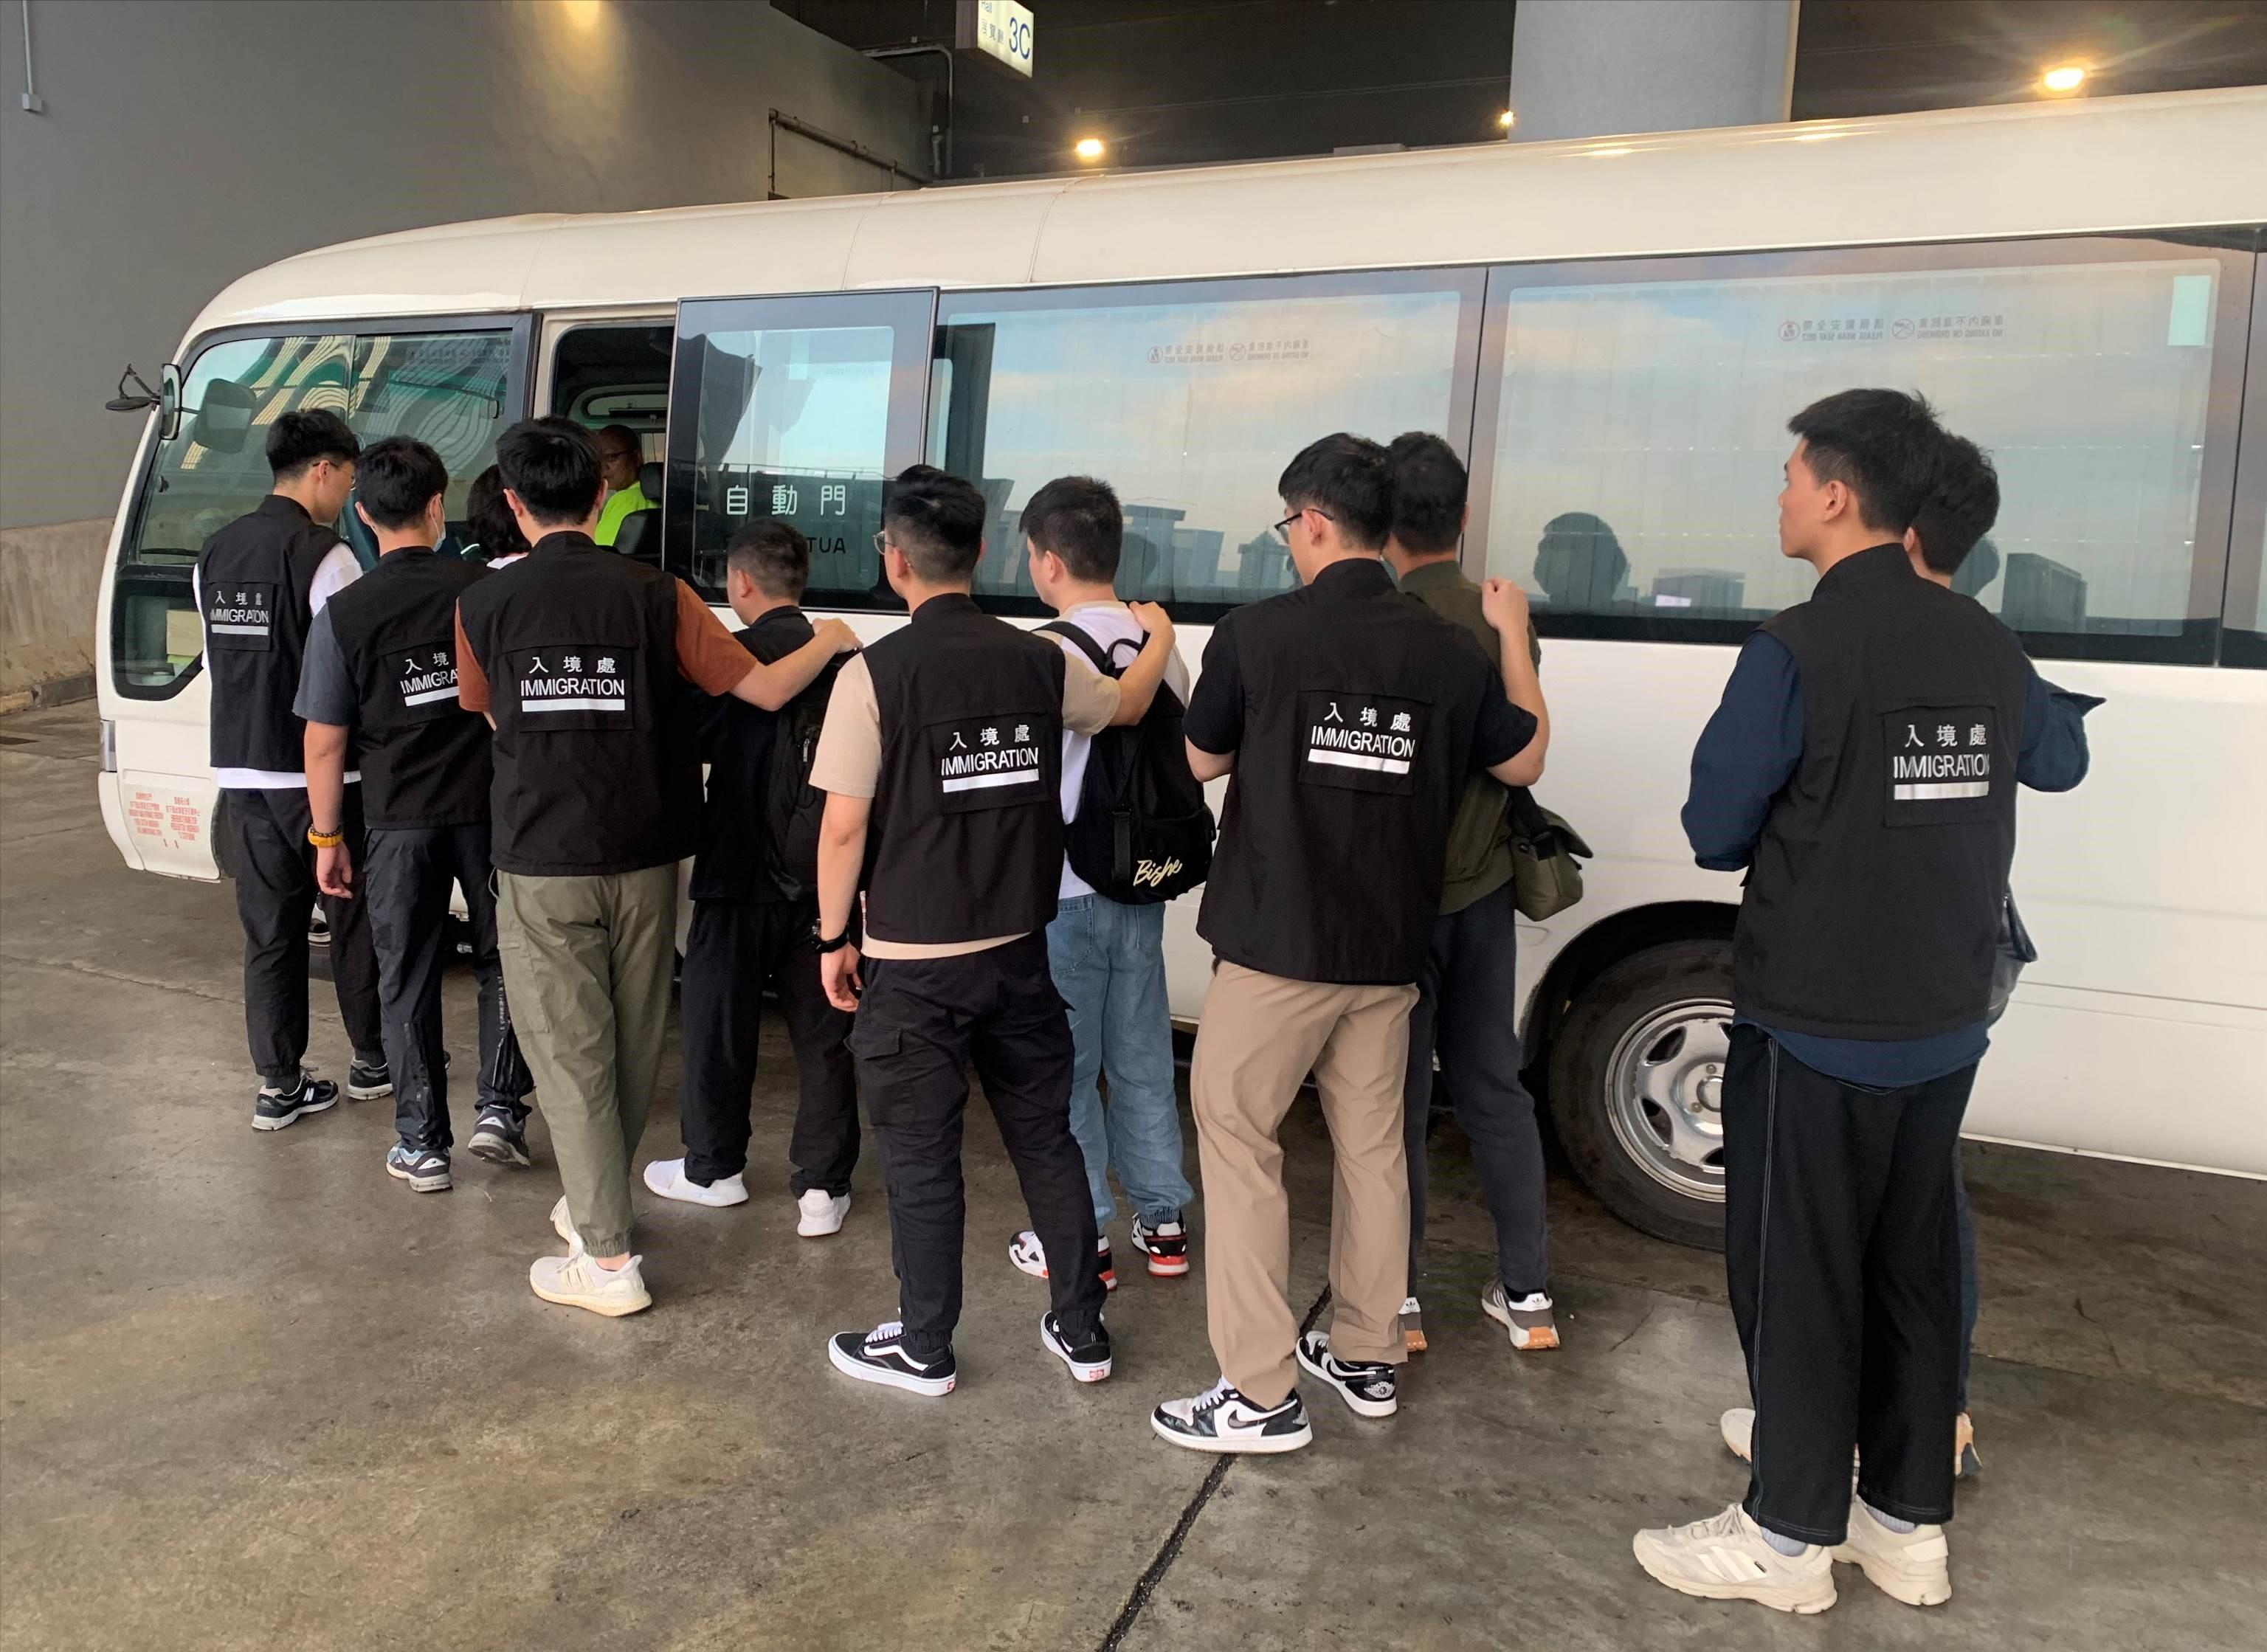 The Immigration Department mounted a series of territory-wide anti-illegal worker operations codenamed "Twilight", and joint operations with the Hong Kong Police Force codenamed "Champion" and "Windsand", for four consecutive days from December 11 to yesterday (December 14). Photo shows suspected illegal workers arrested during an operation.